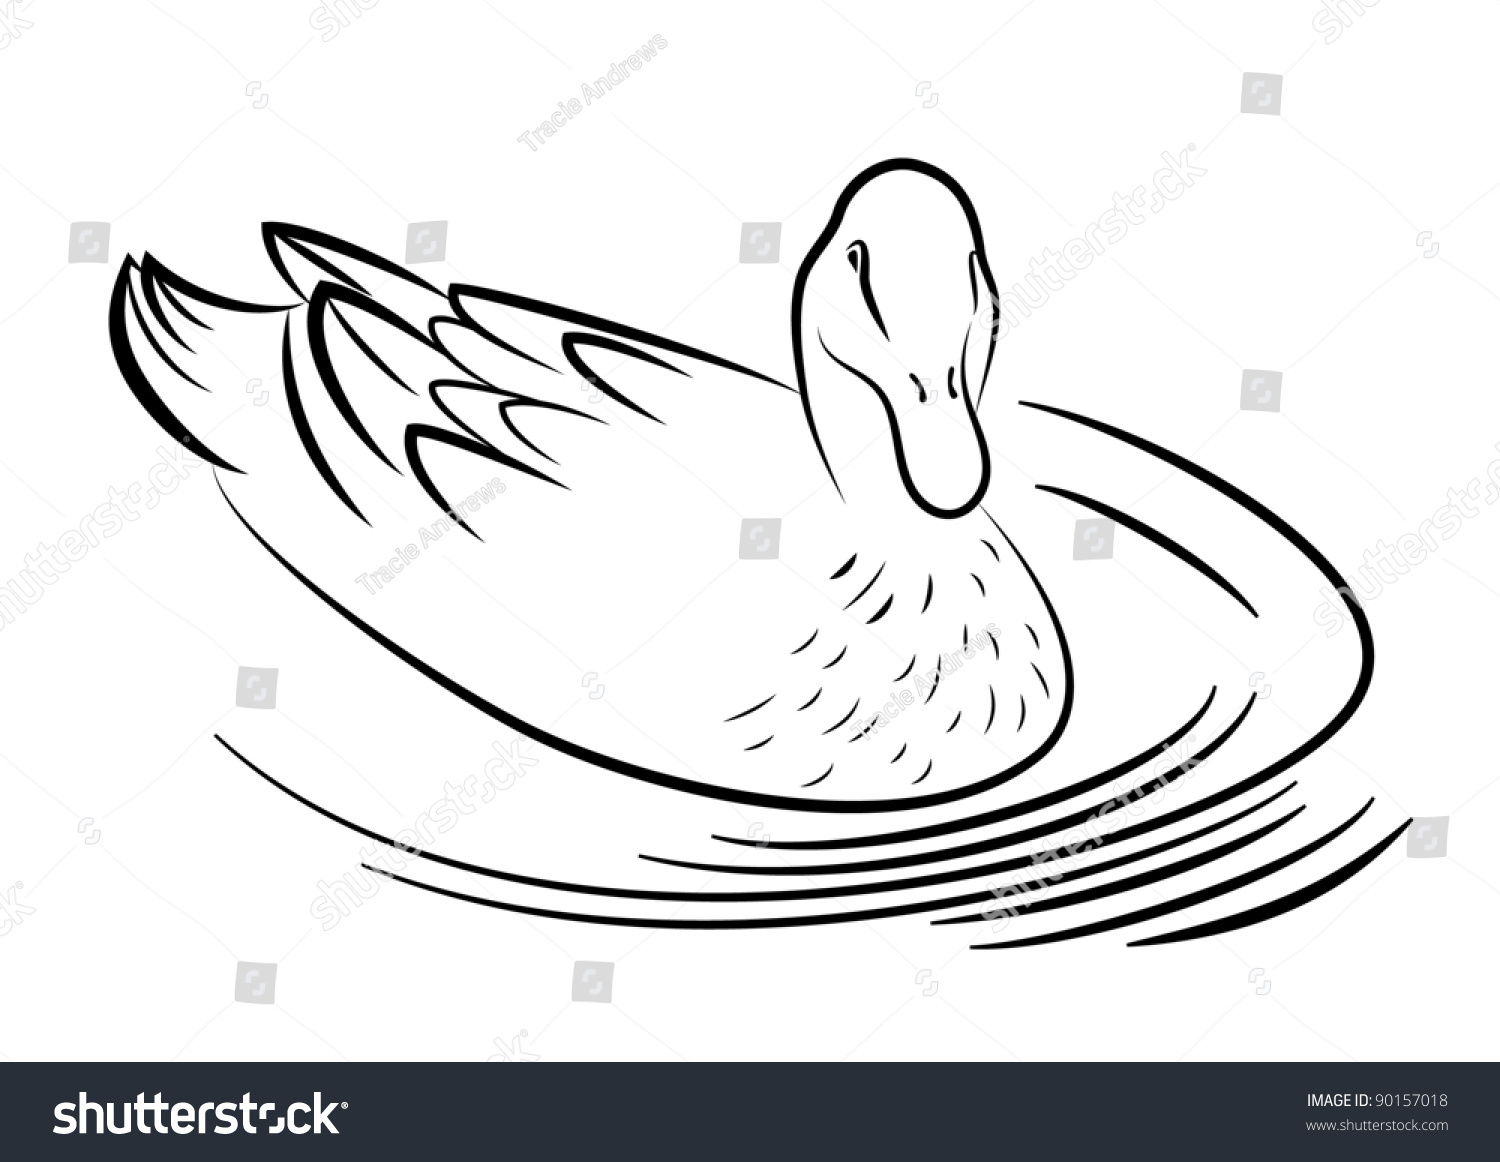 Outline Drawing Duck Isolated On White Stock Vector 90157018 - Shutterstock